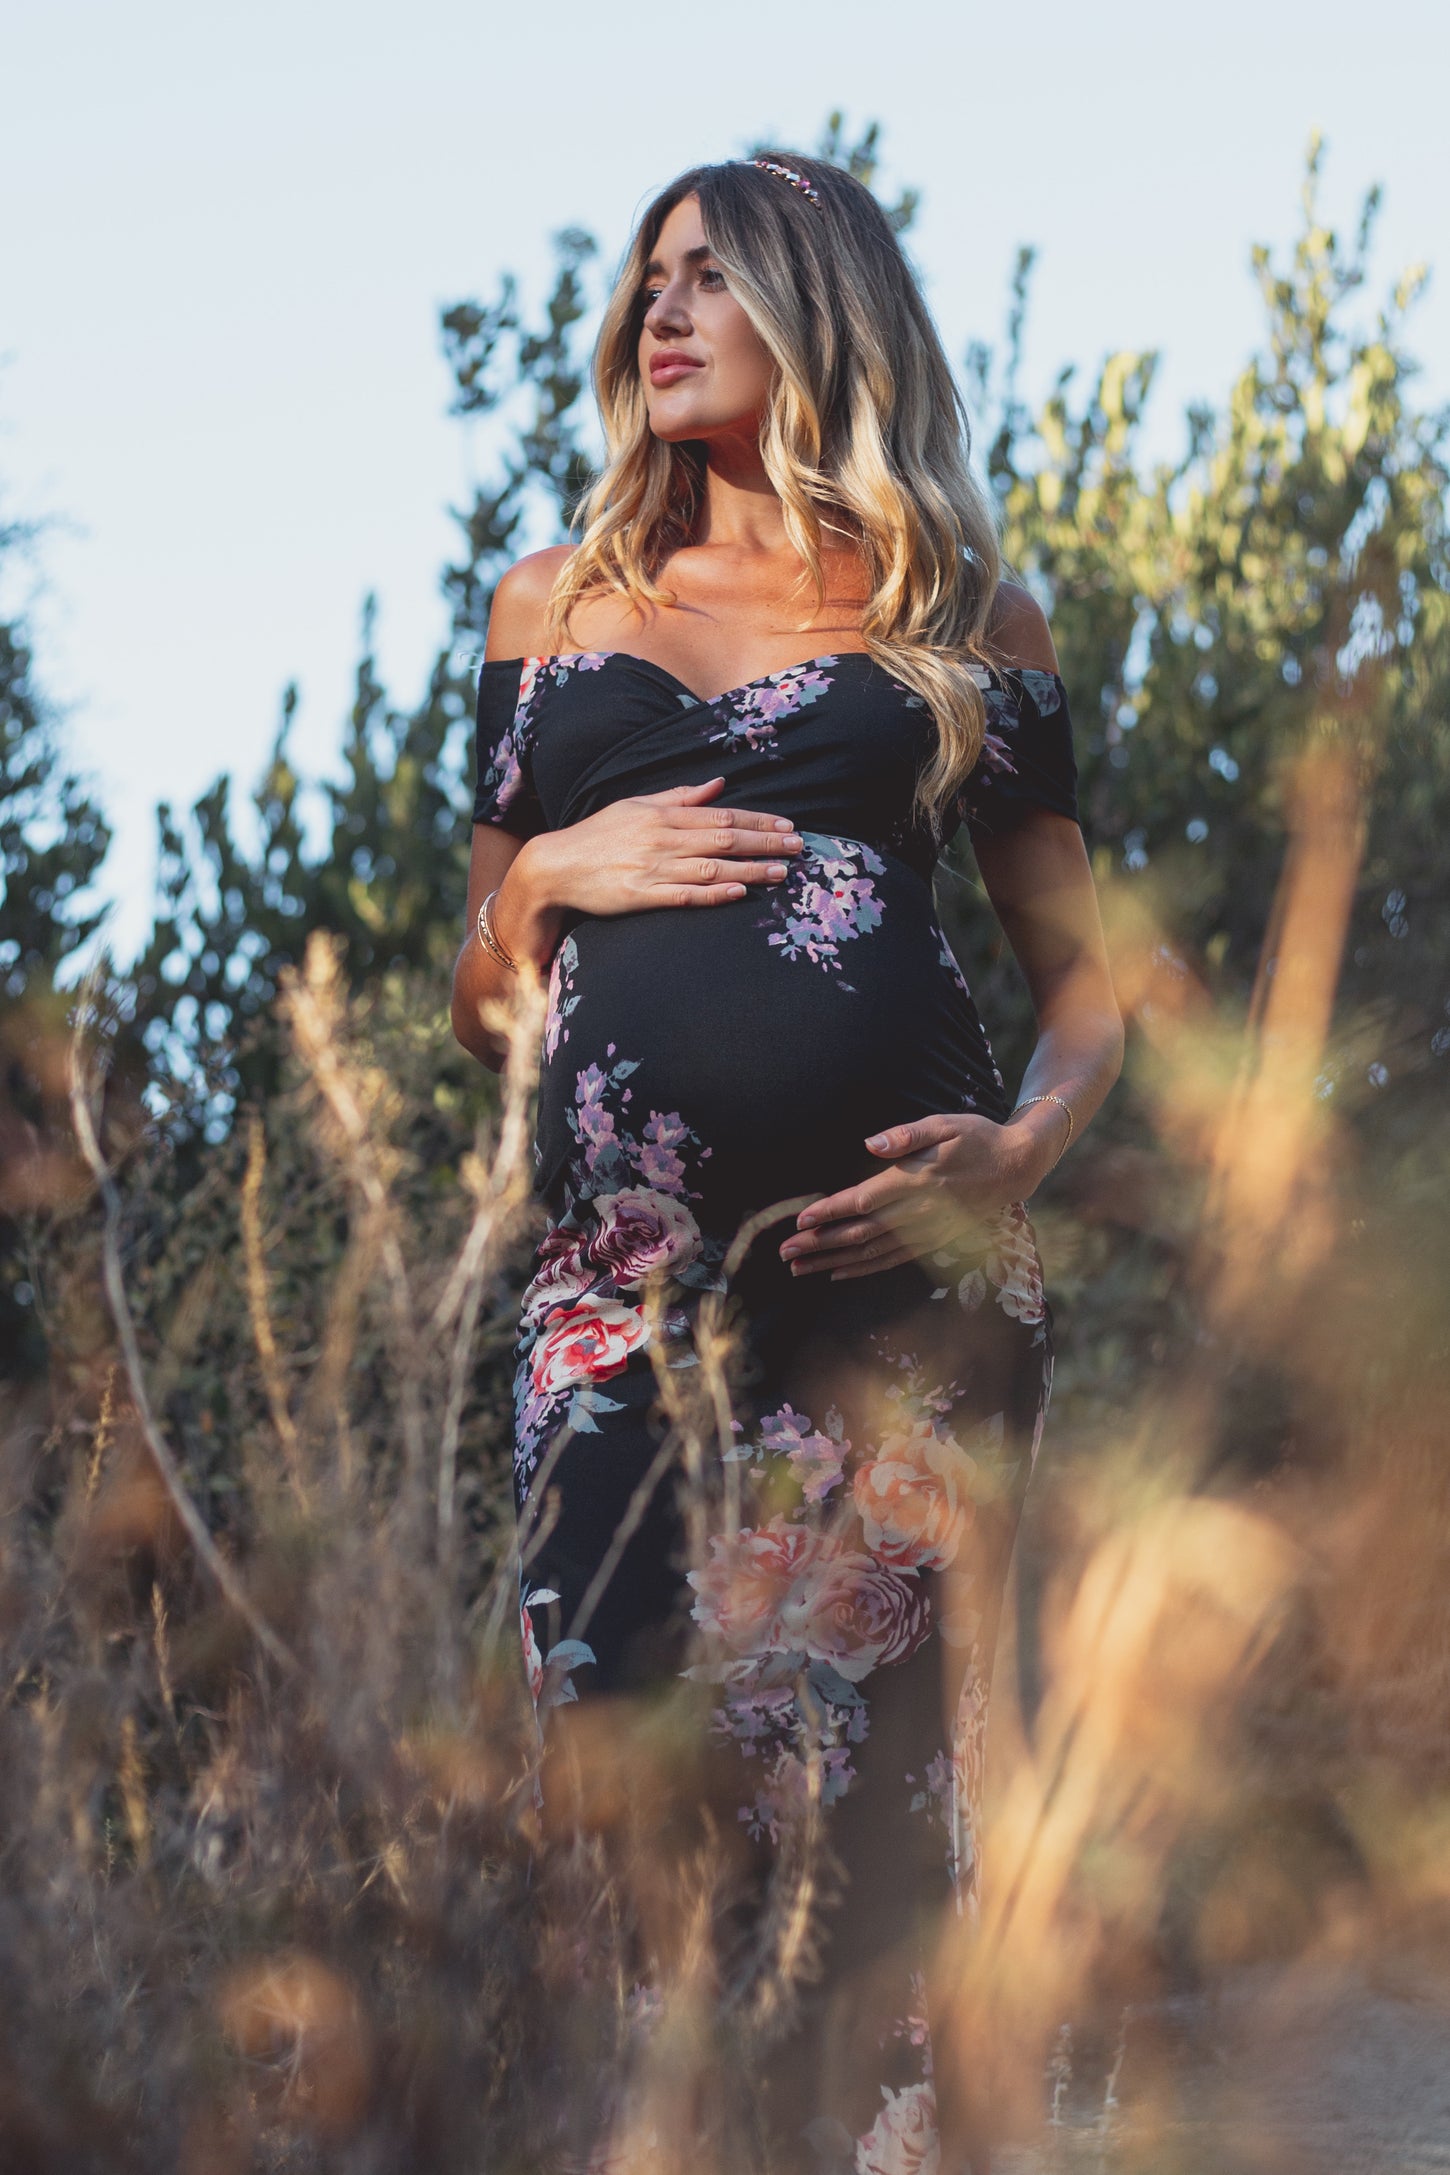 PinkBlush Black Rose Floral Off Shoulder Wrap Maternity Photoshoot Gown/Dress